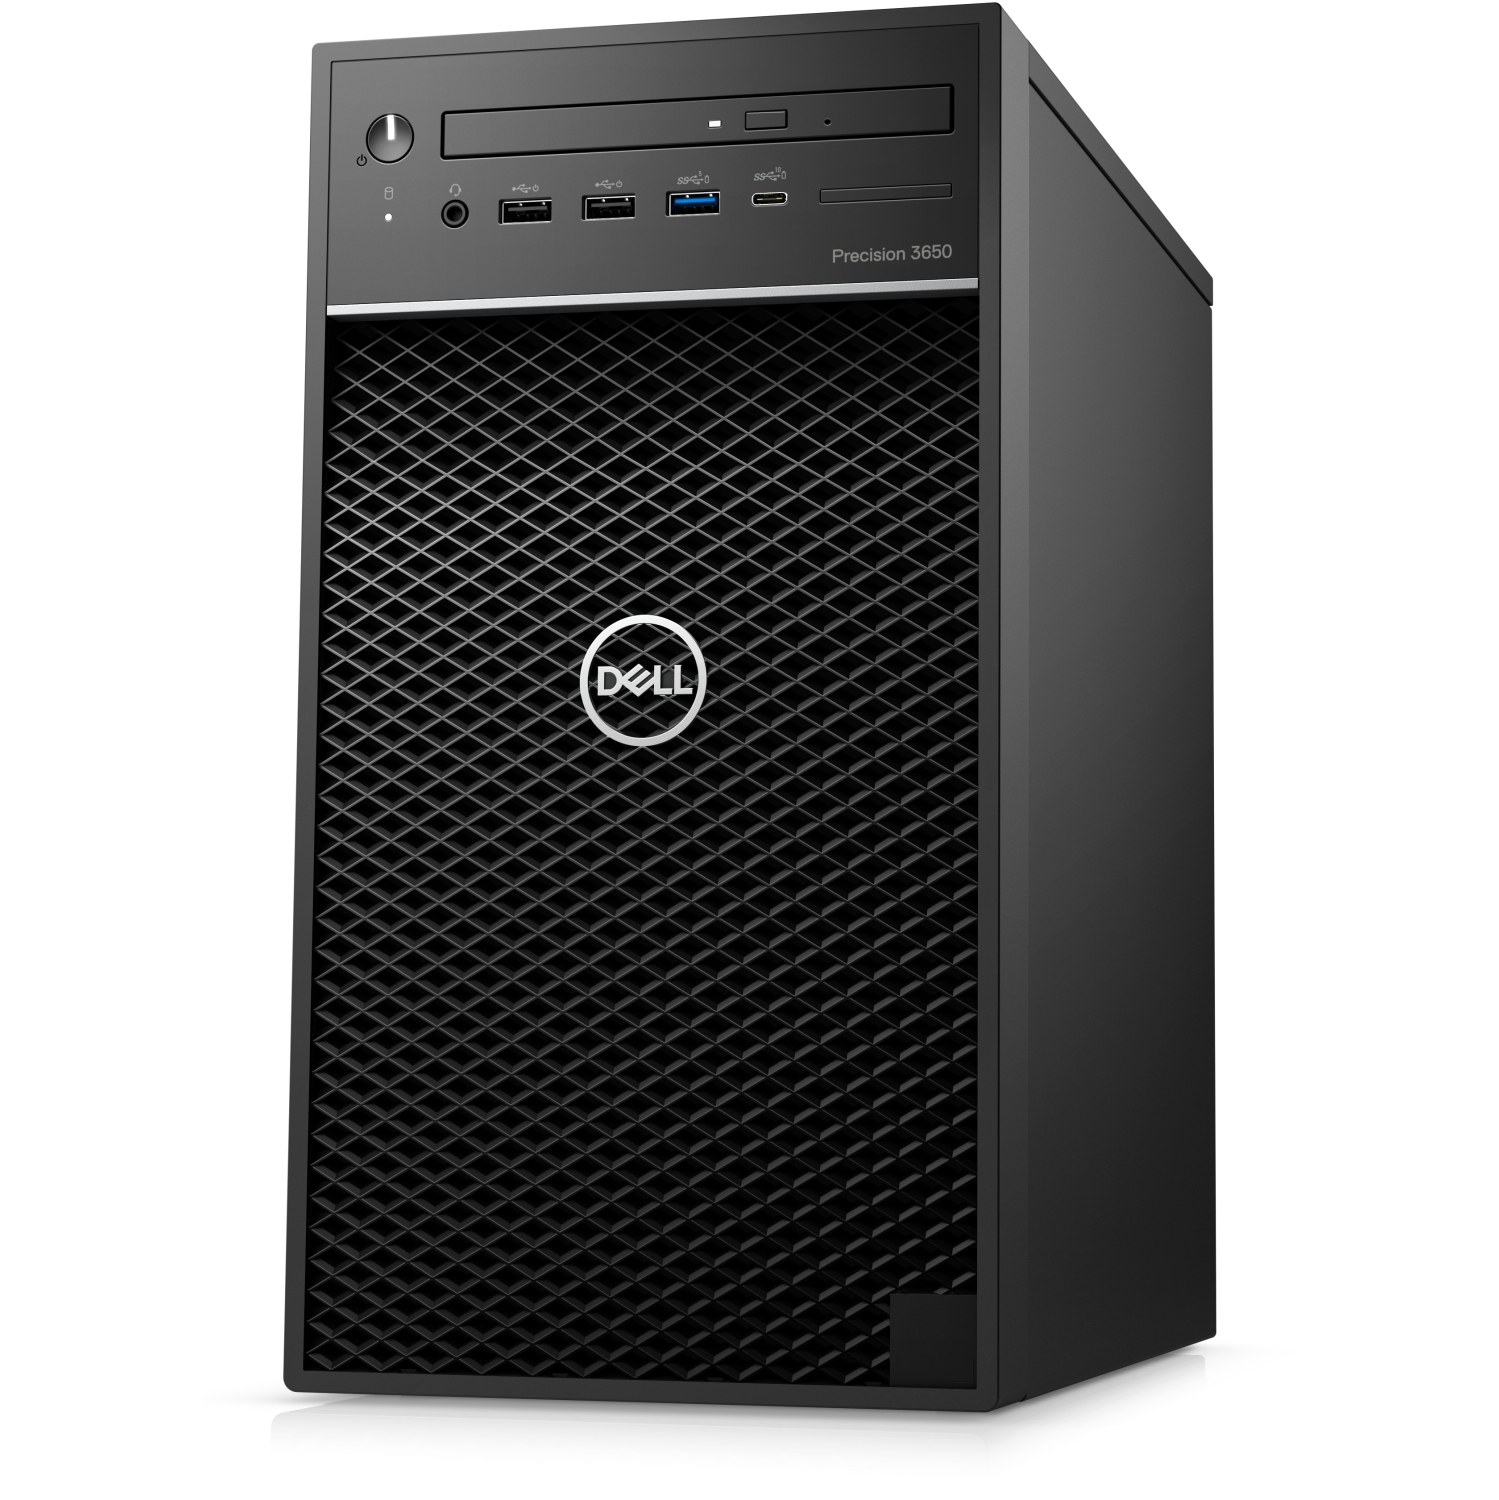 Refurbished (Excellent) - Dell Precision T3650 Workstation Desktop (2021), Core i9 - 1TB SSD - 32GB RAM - RTX 5000, 8 Cores @ 4.9 GHz - 11th Gen CPU Certified Refurbished